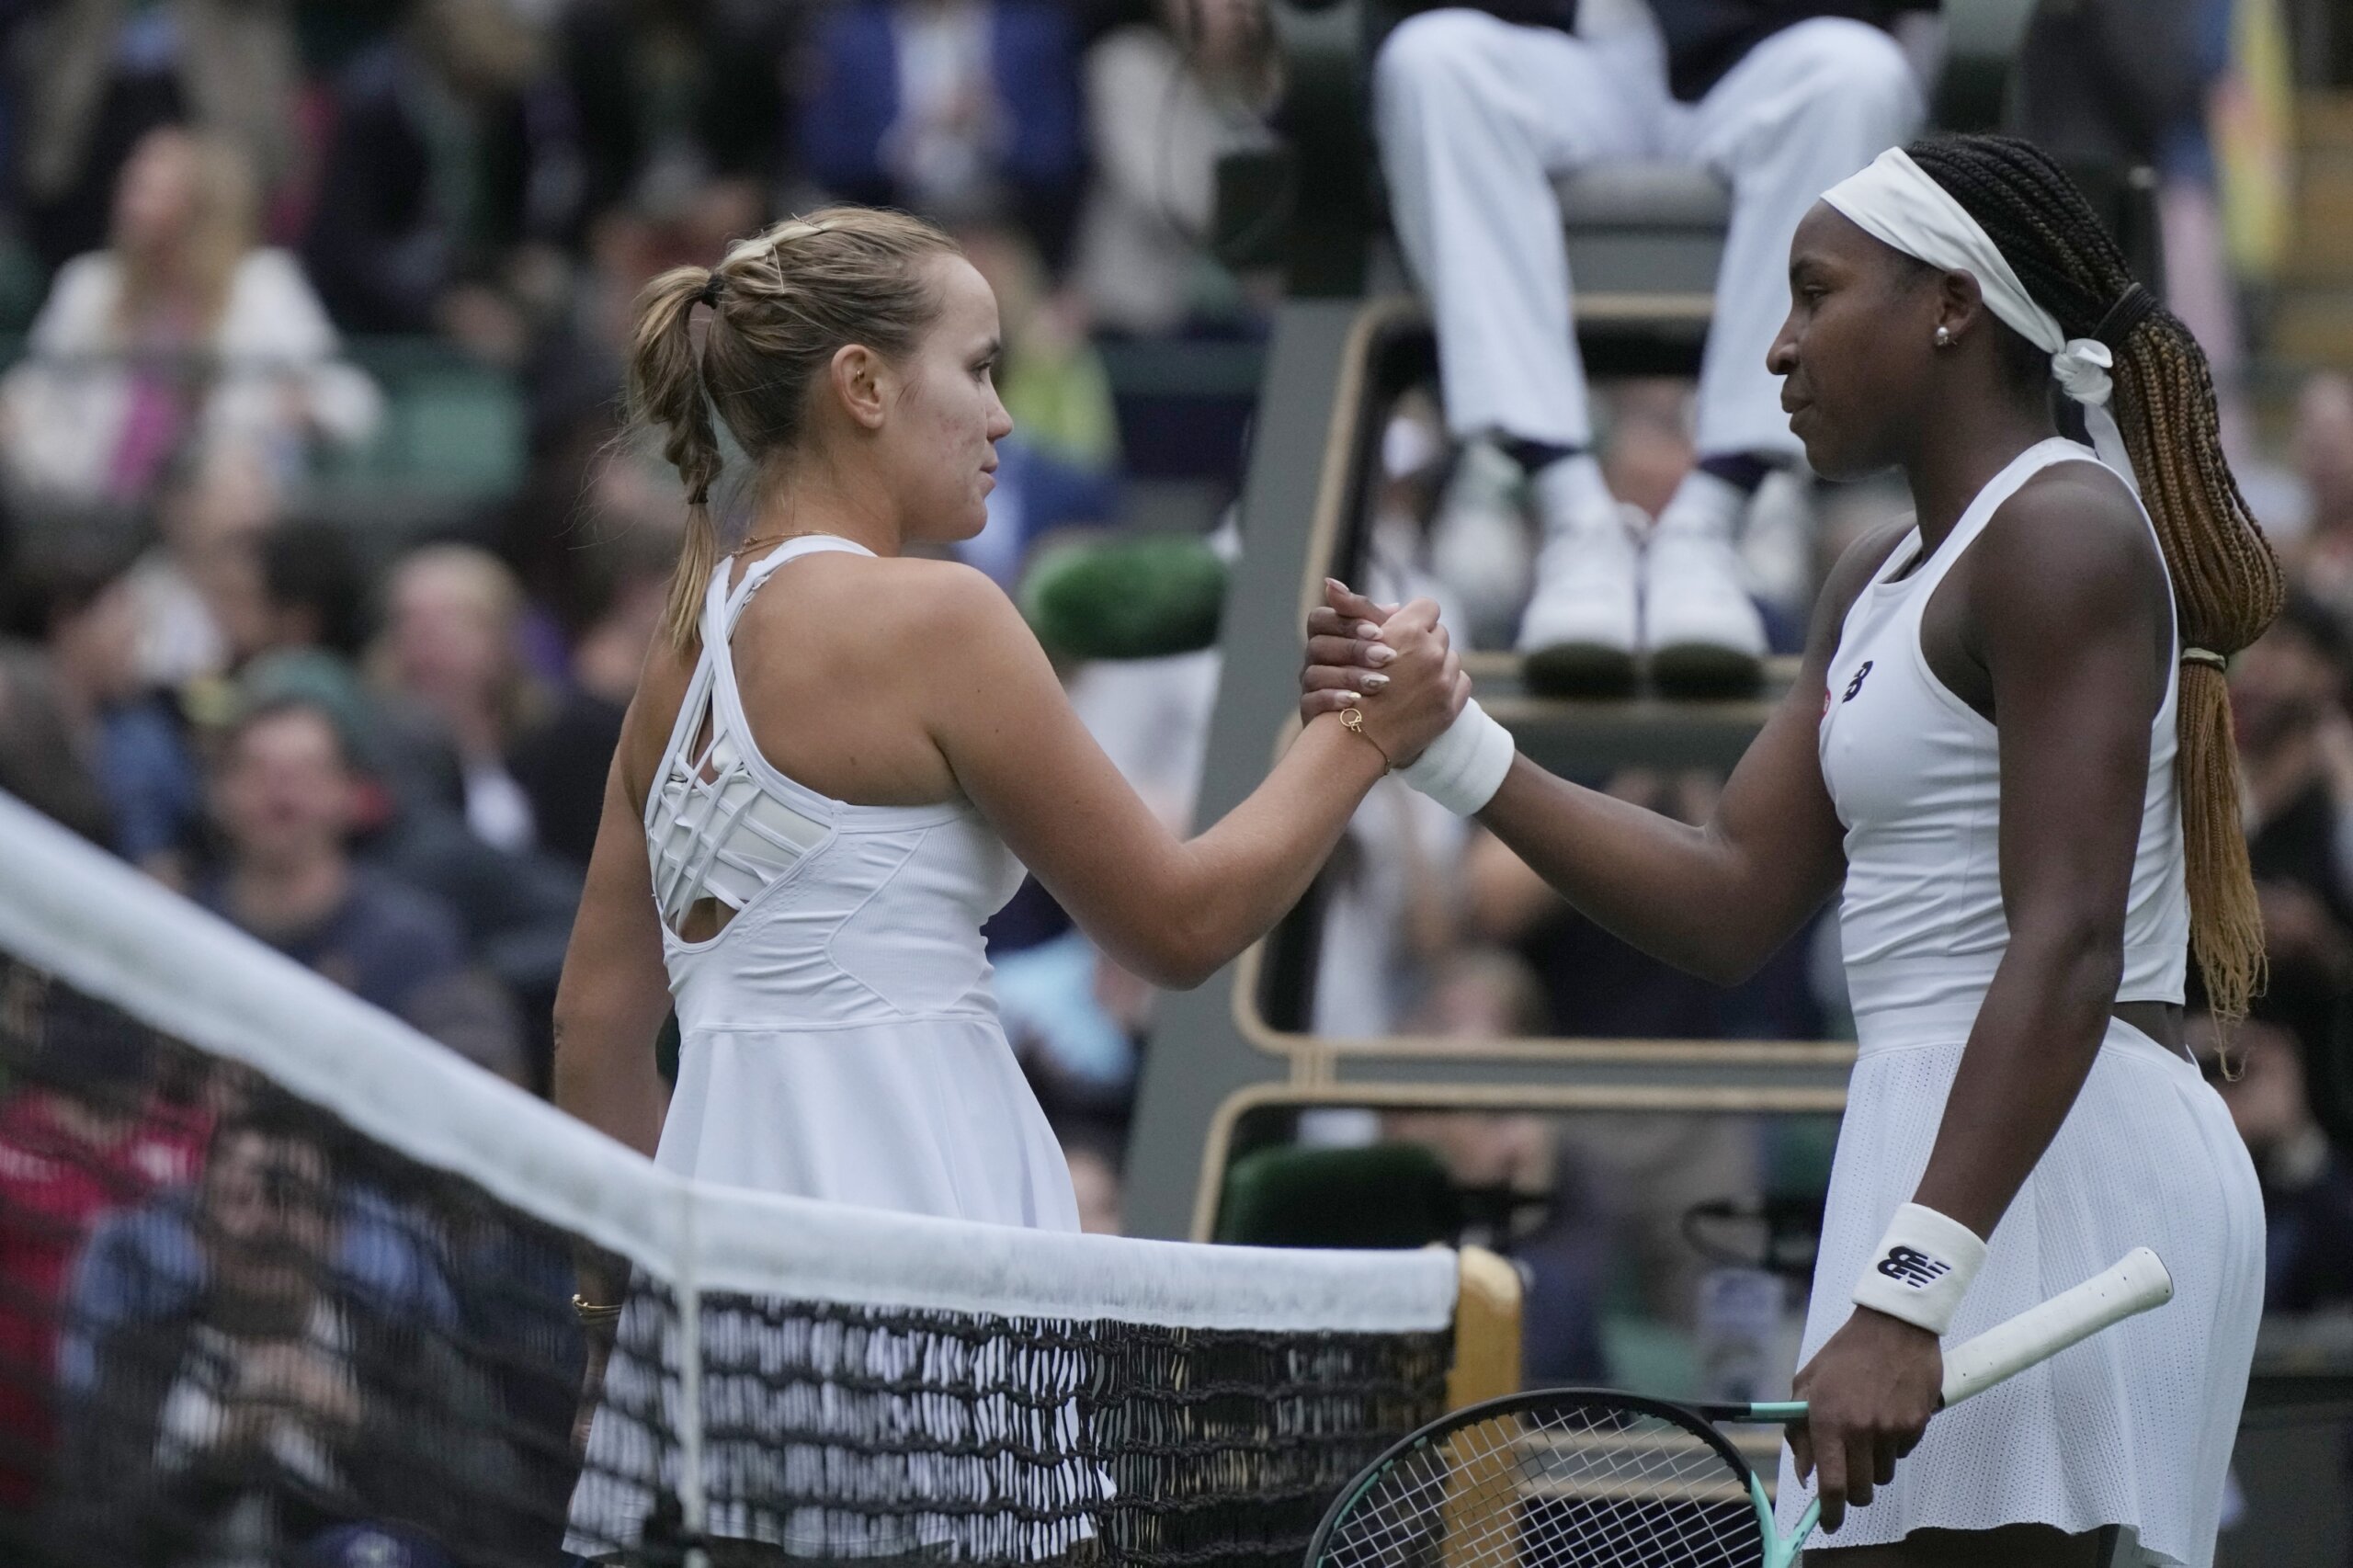 Washington tennis tournament offers equal status for women and men but